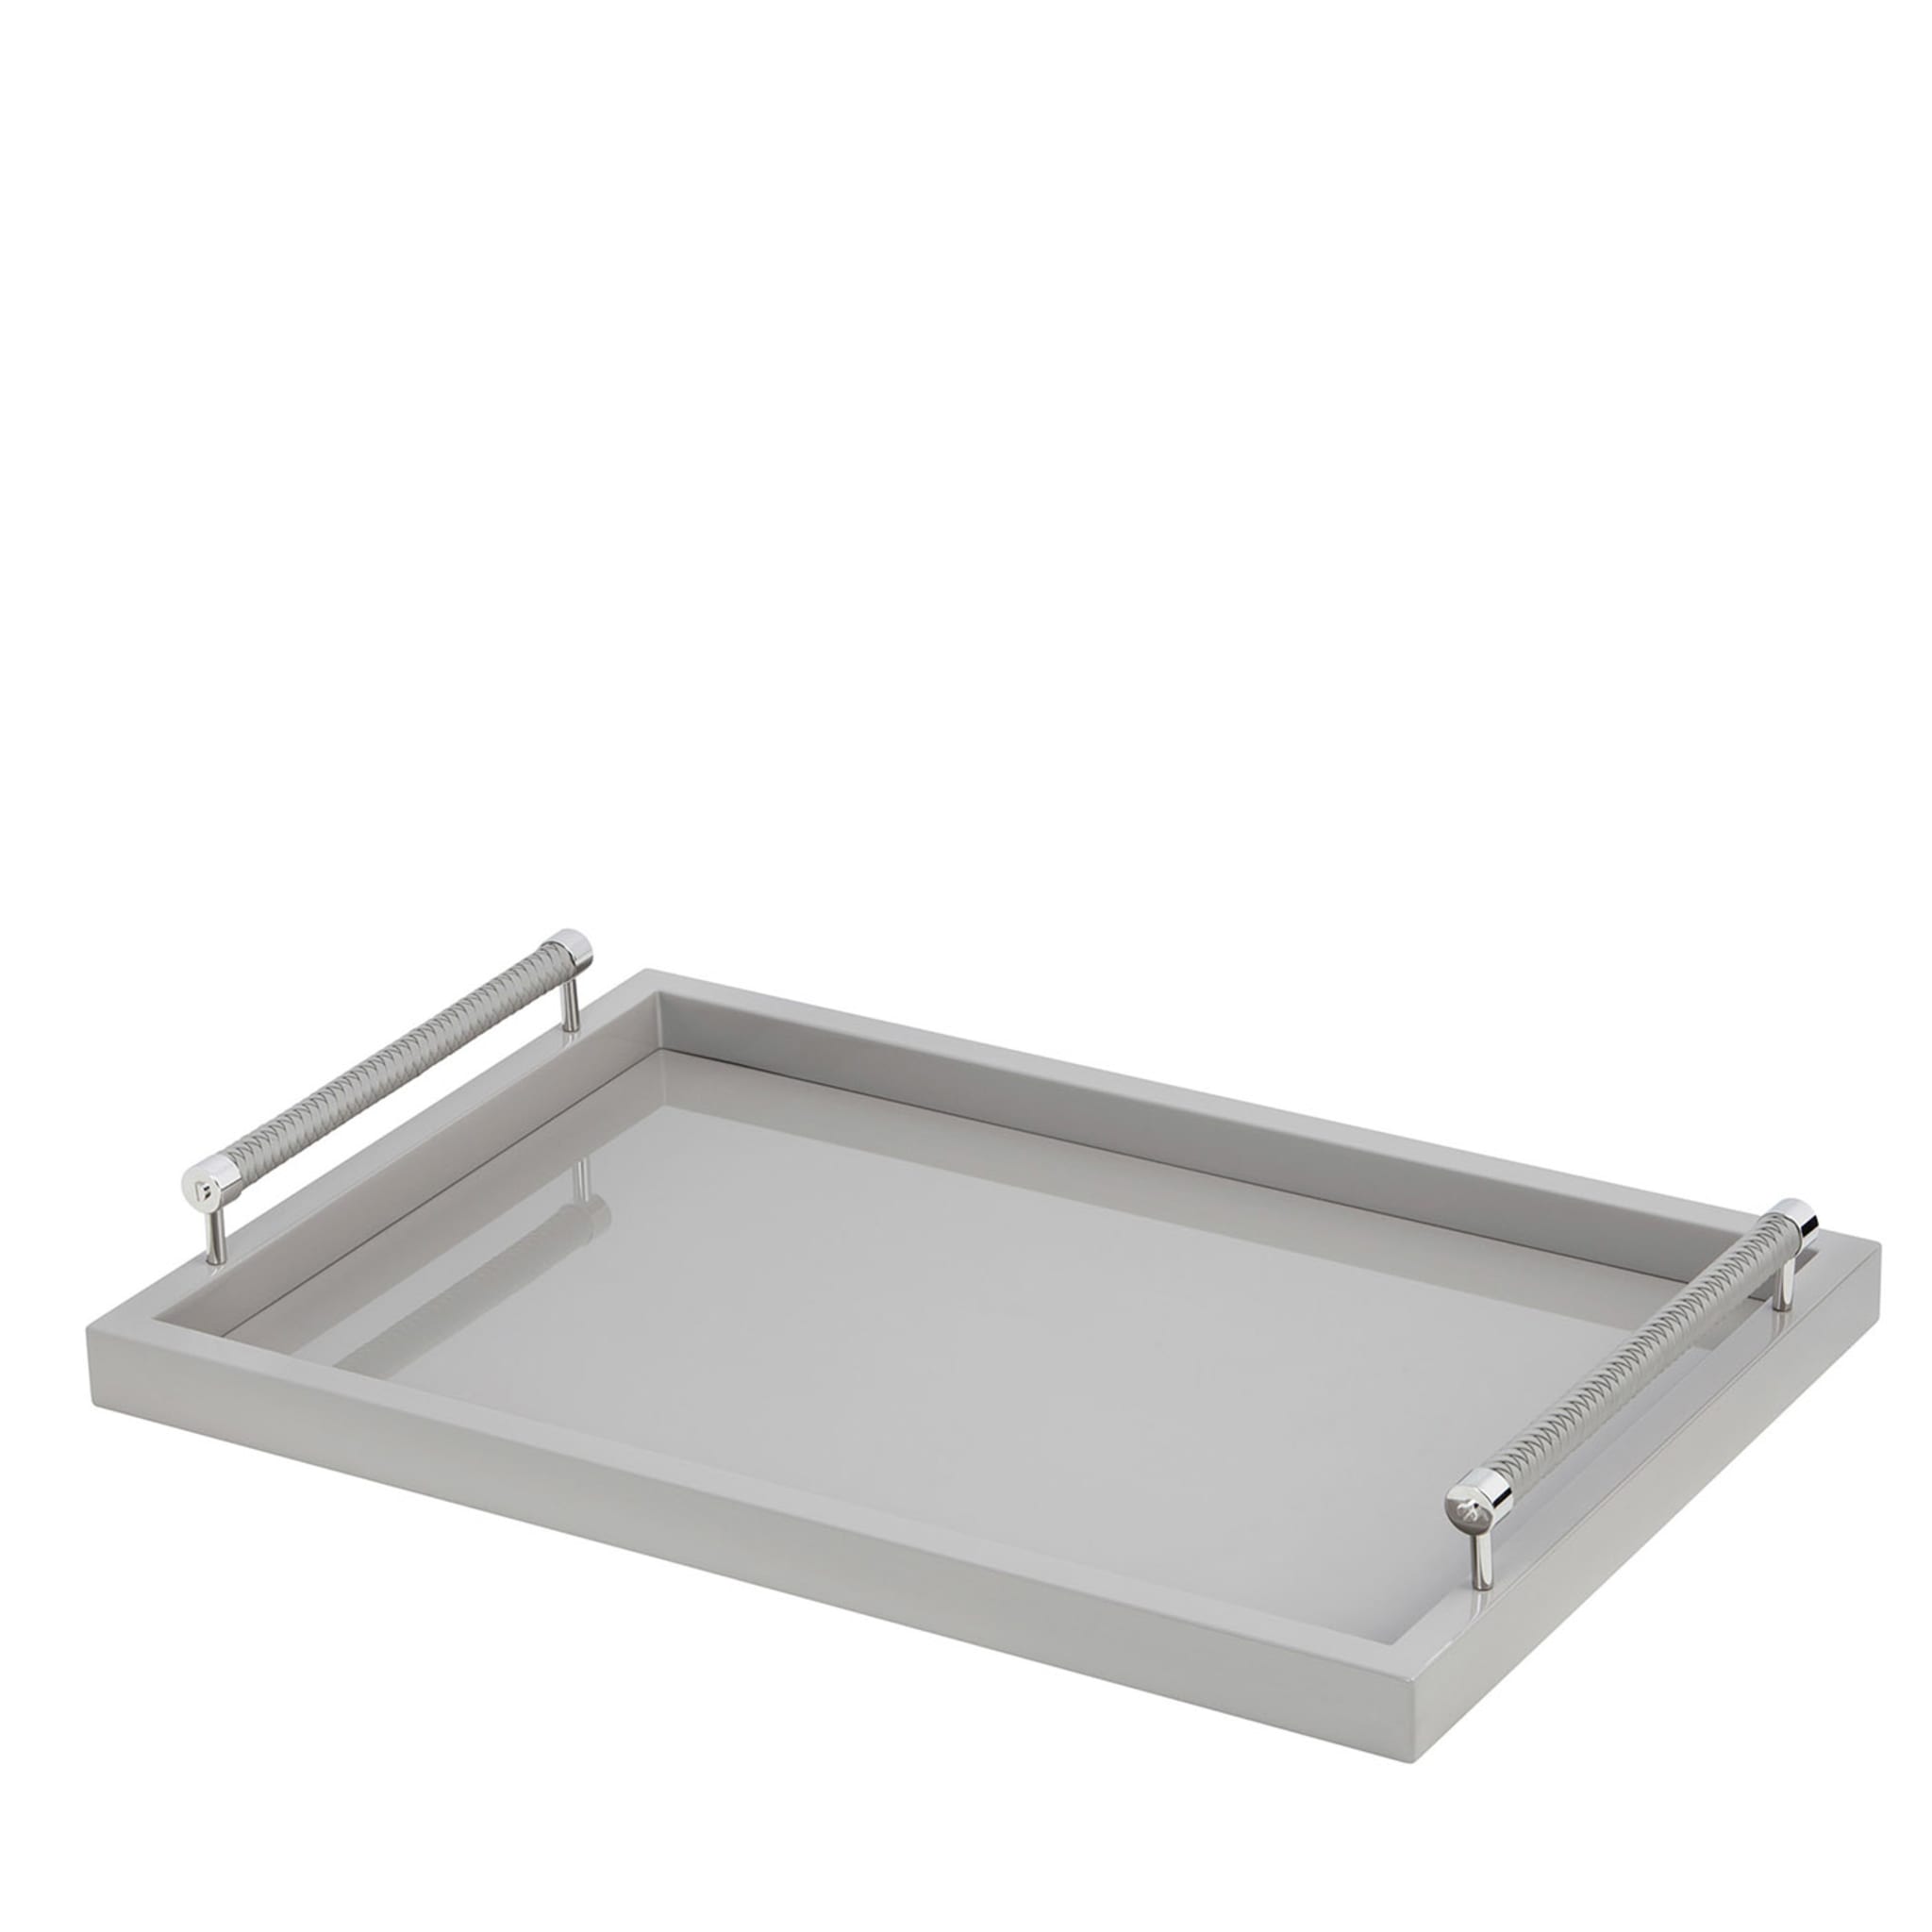 Diana Lacquer Rectangular Tray Large - Main view